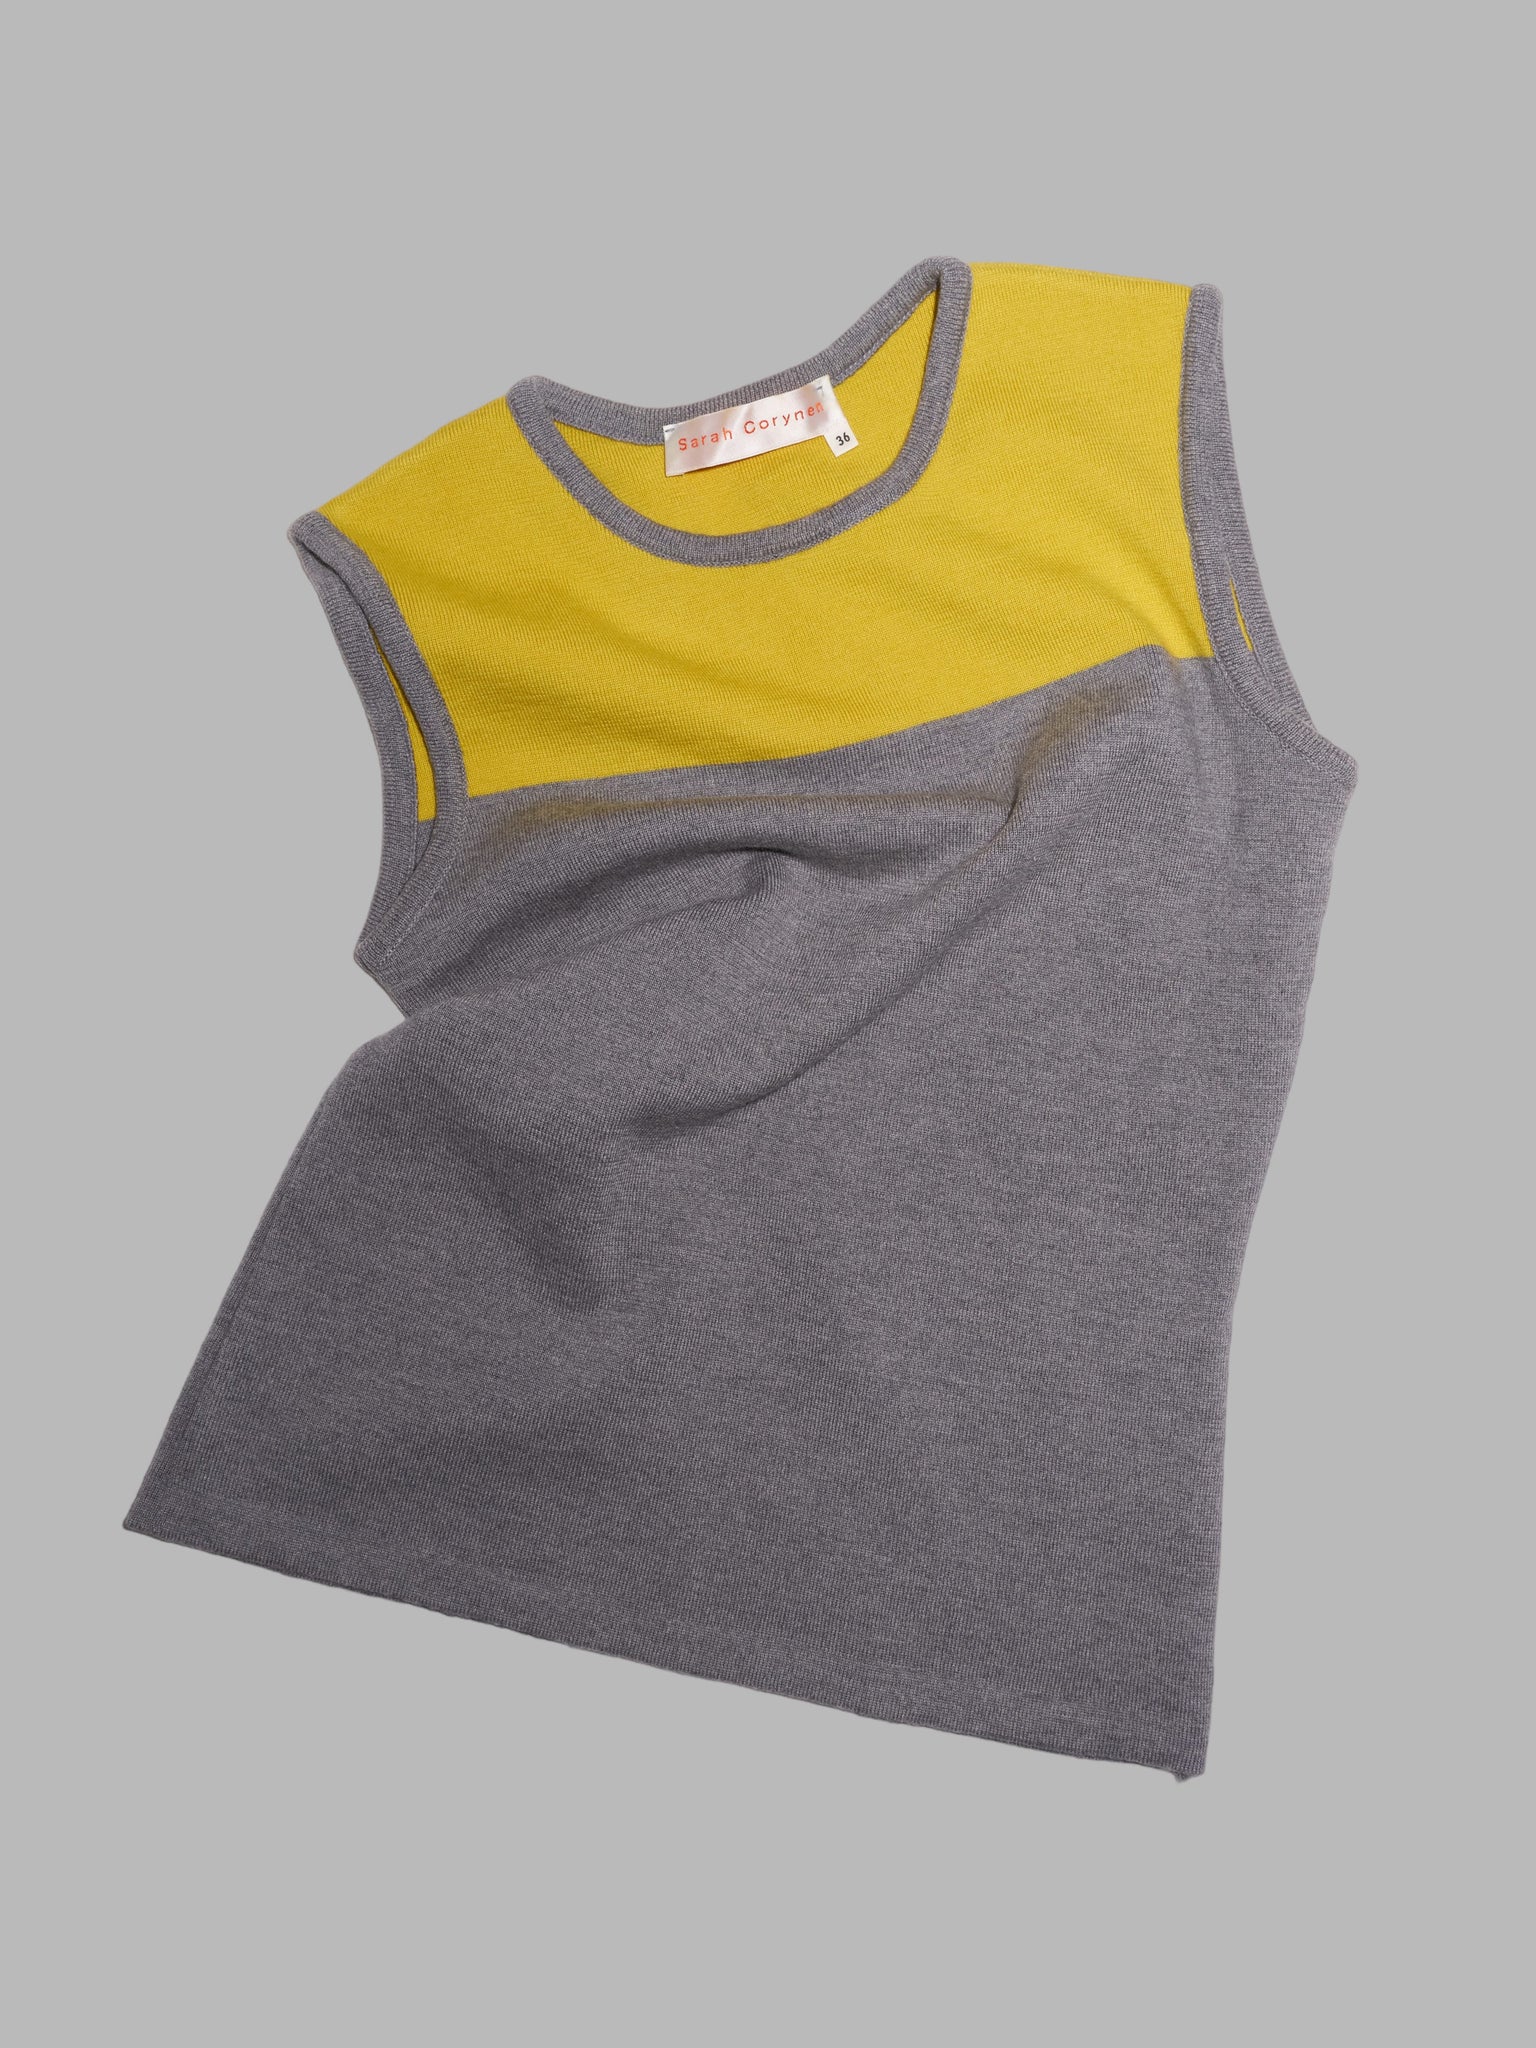 Sarah Corynen yellow and grey knitted wool vest